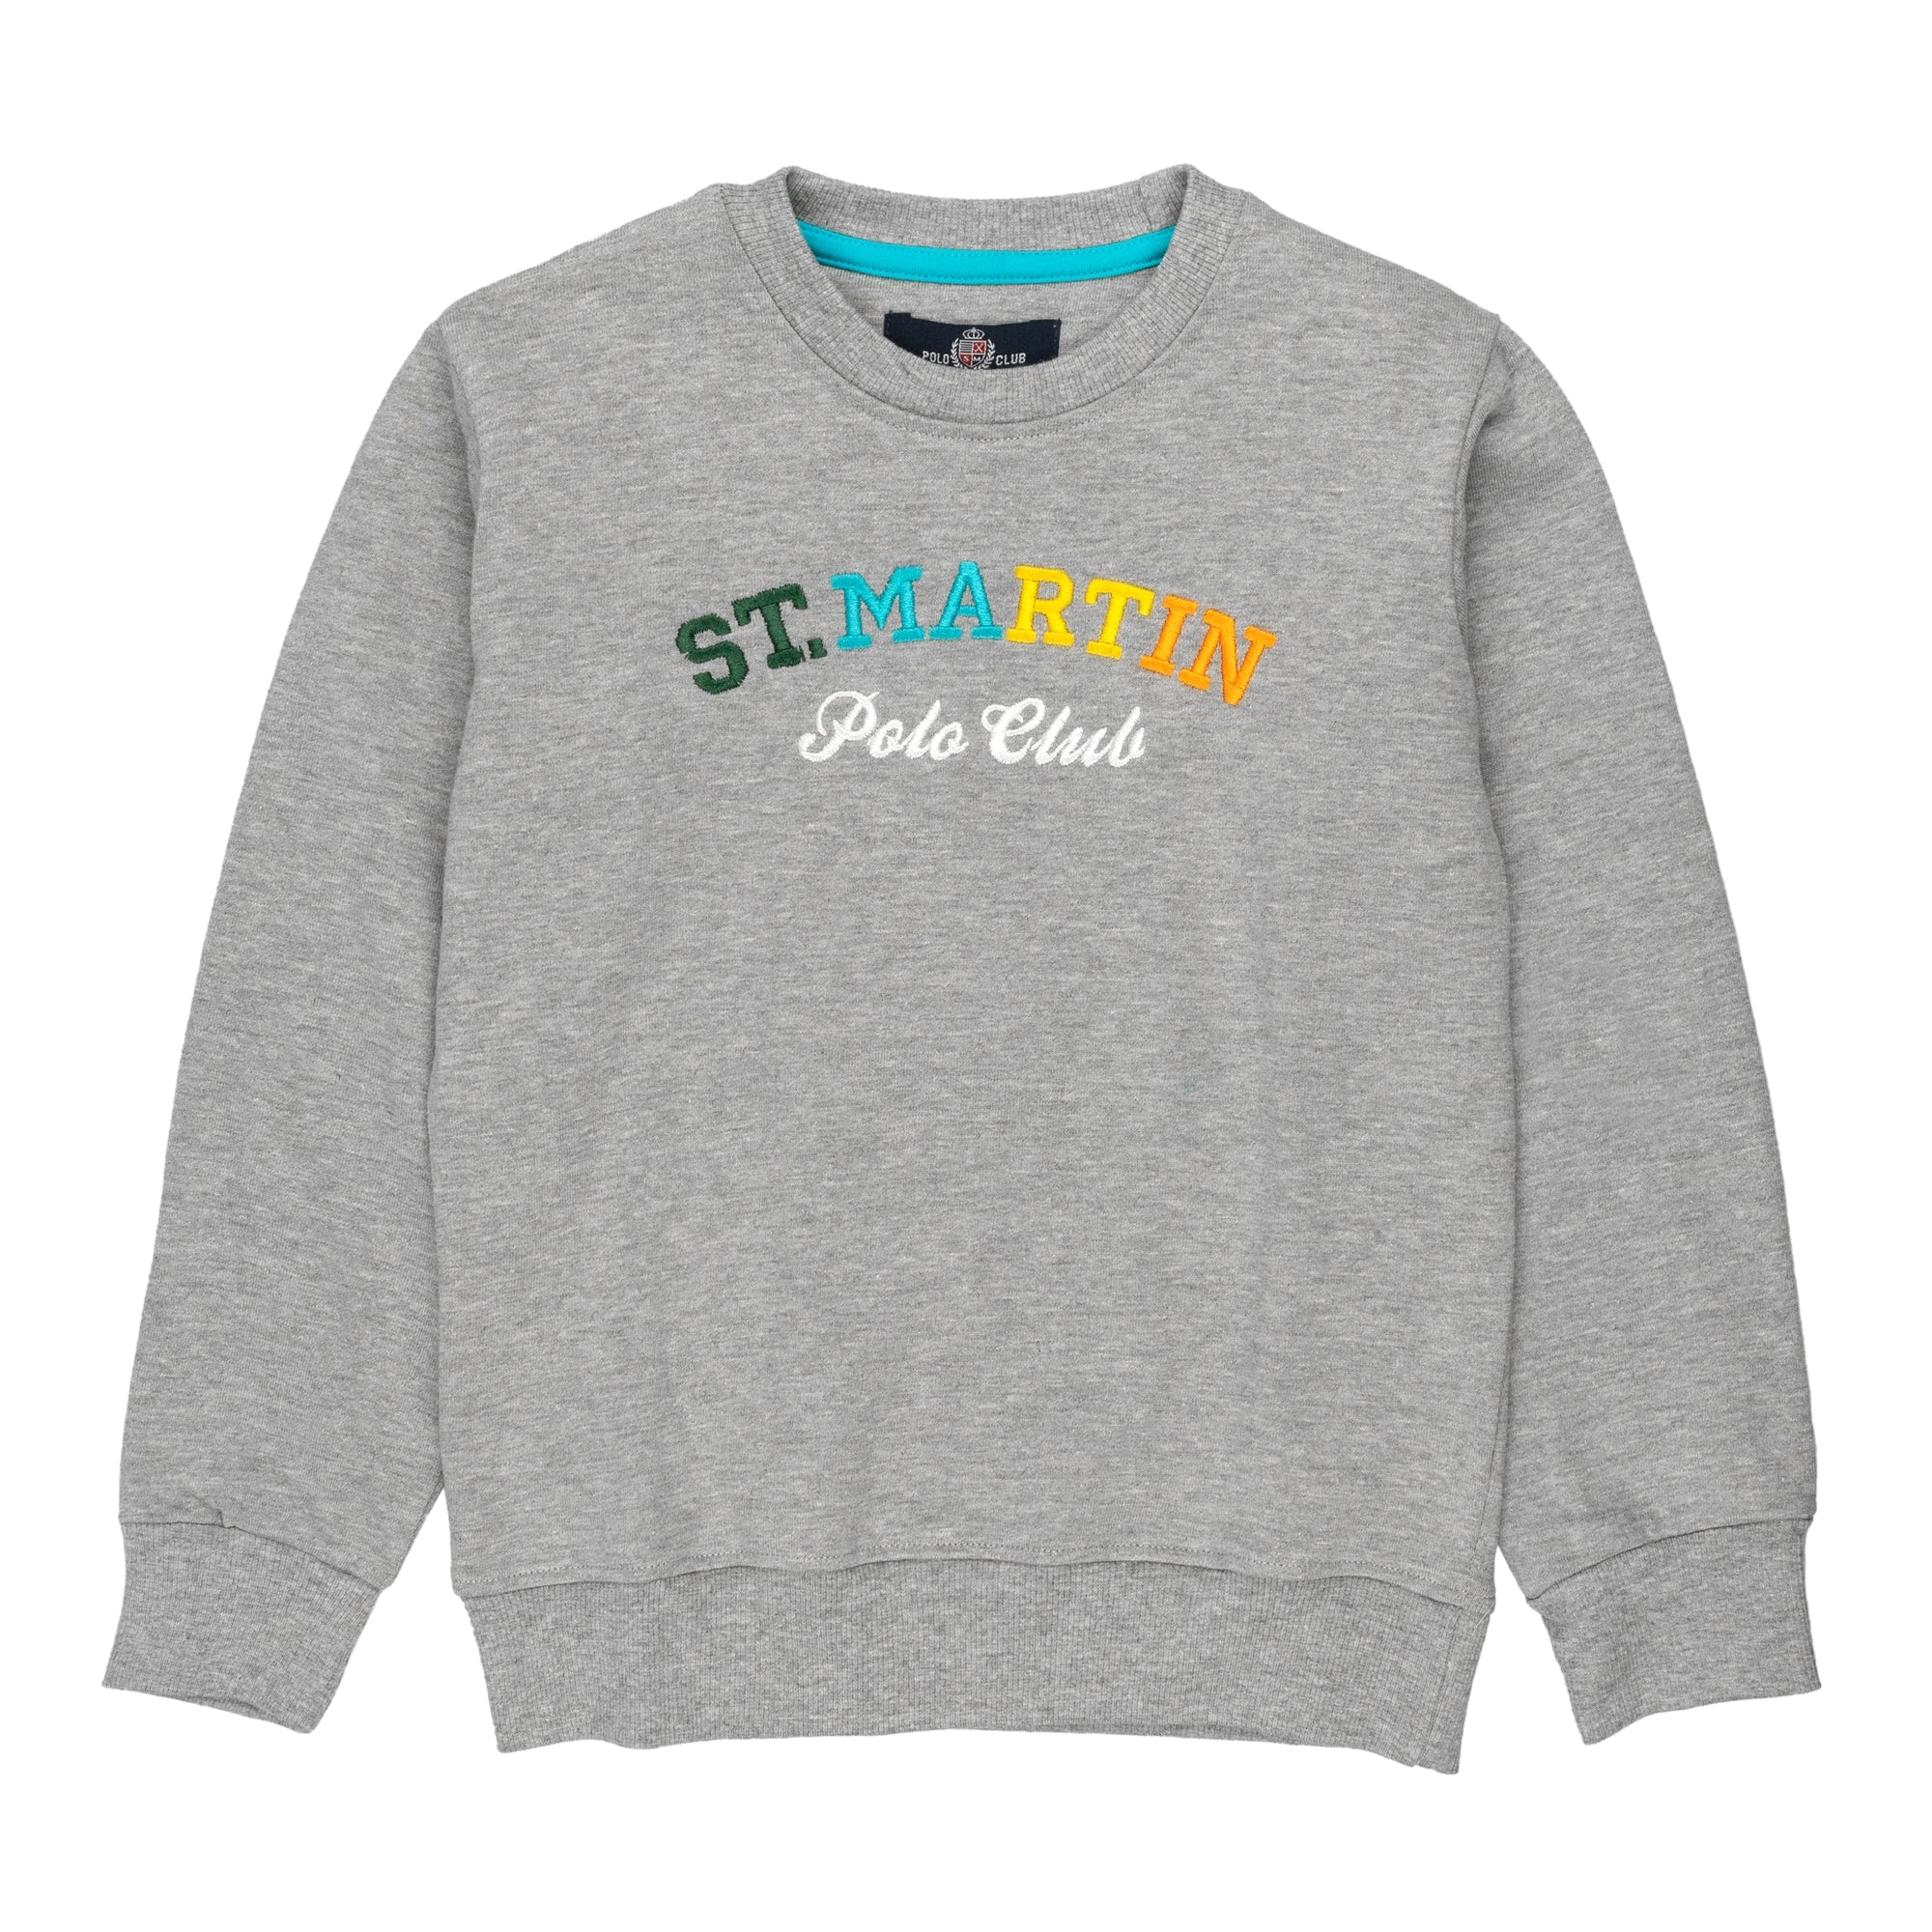 French terry sweatshirt and multicolor logo print